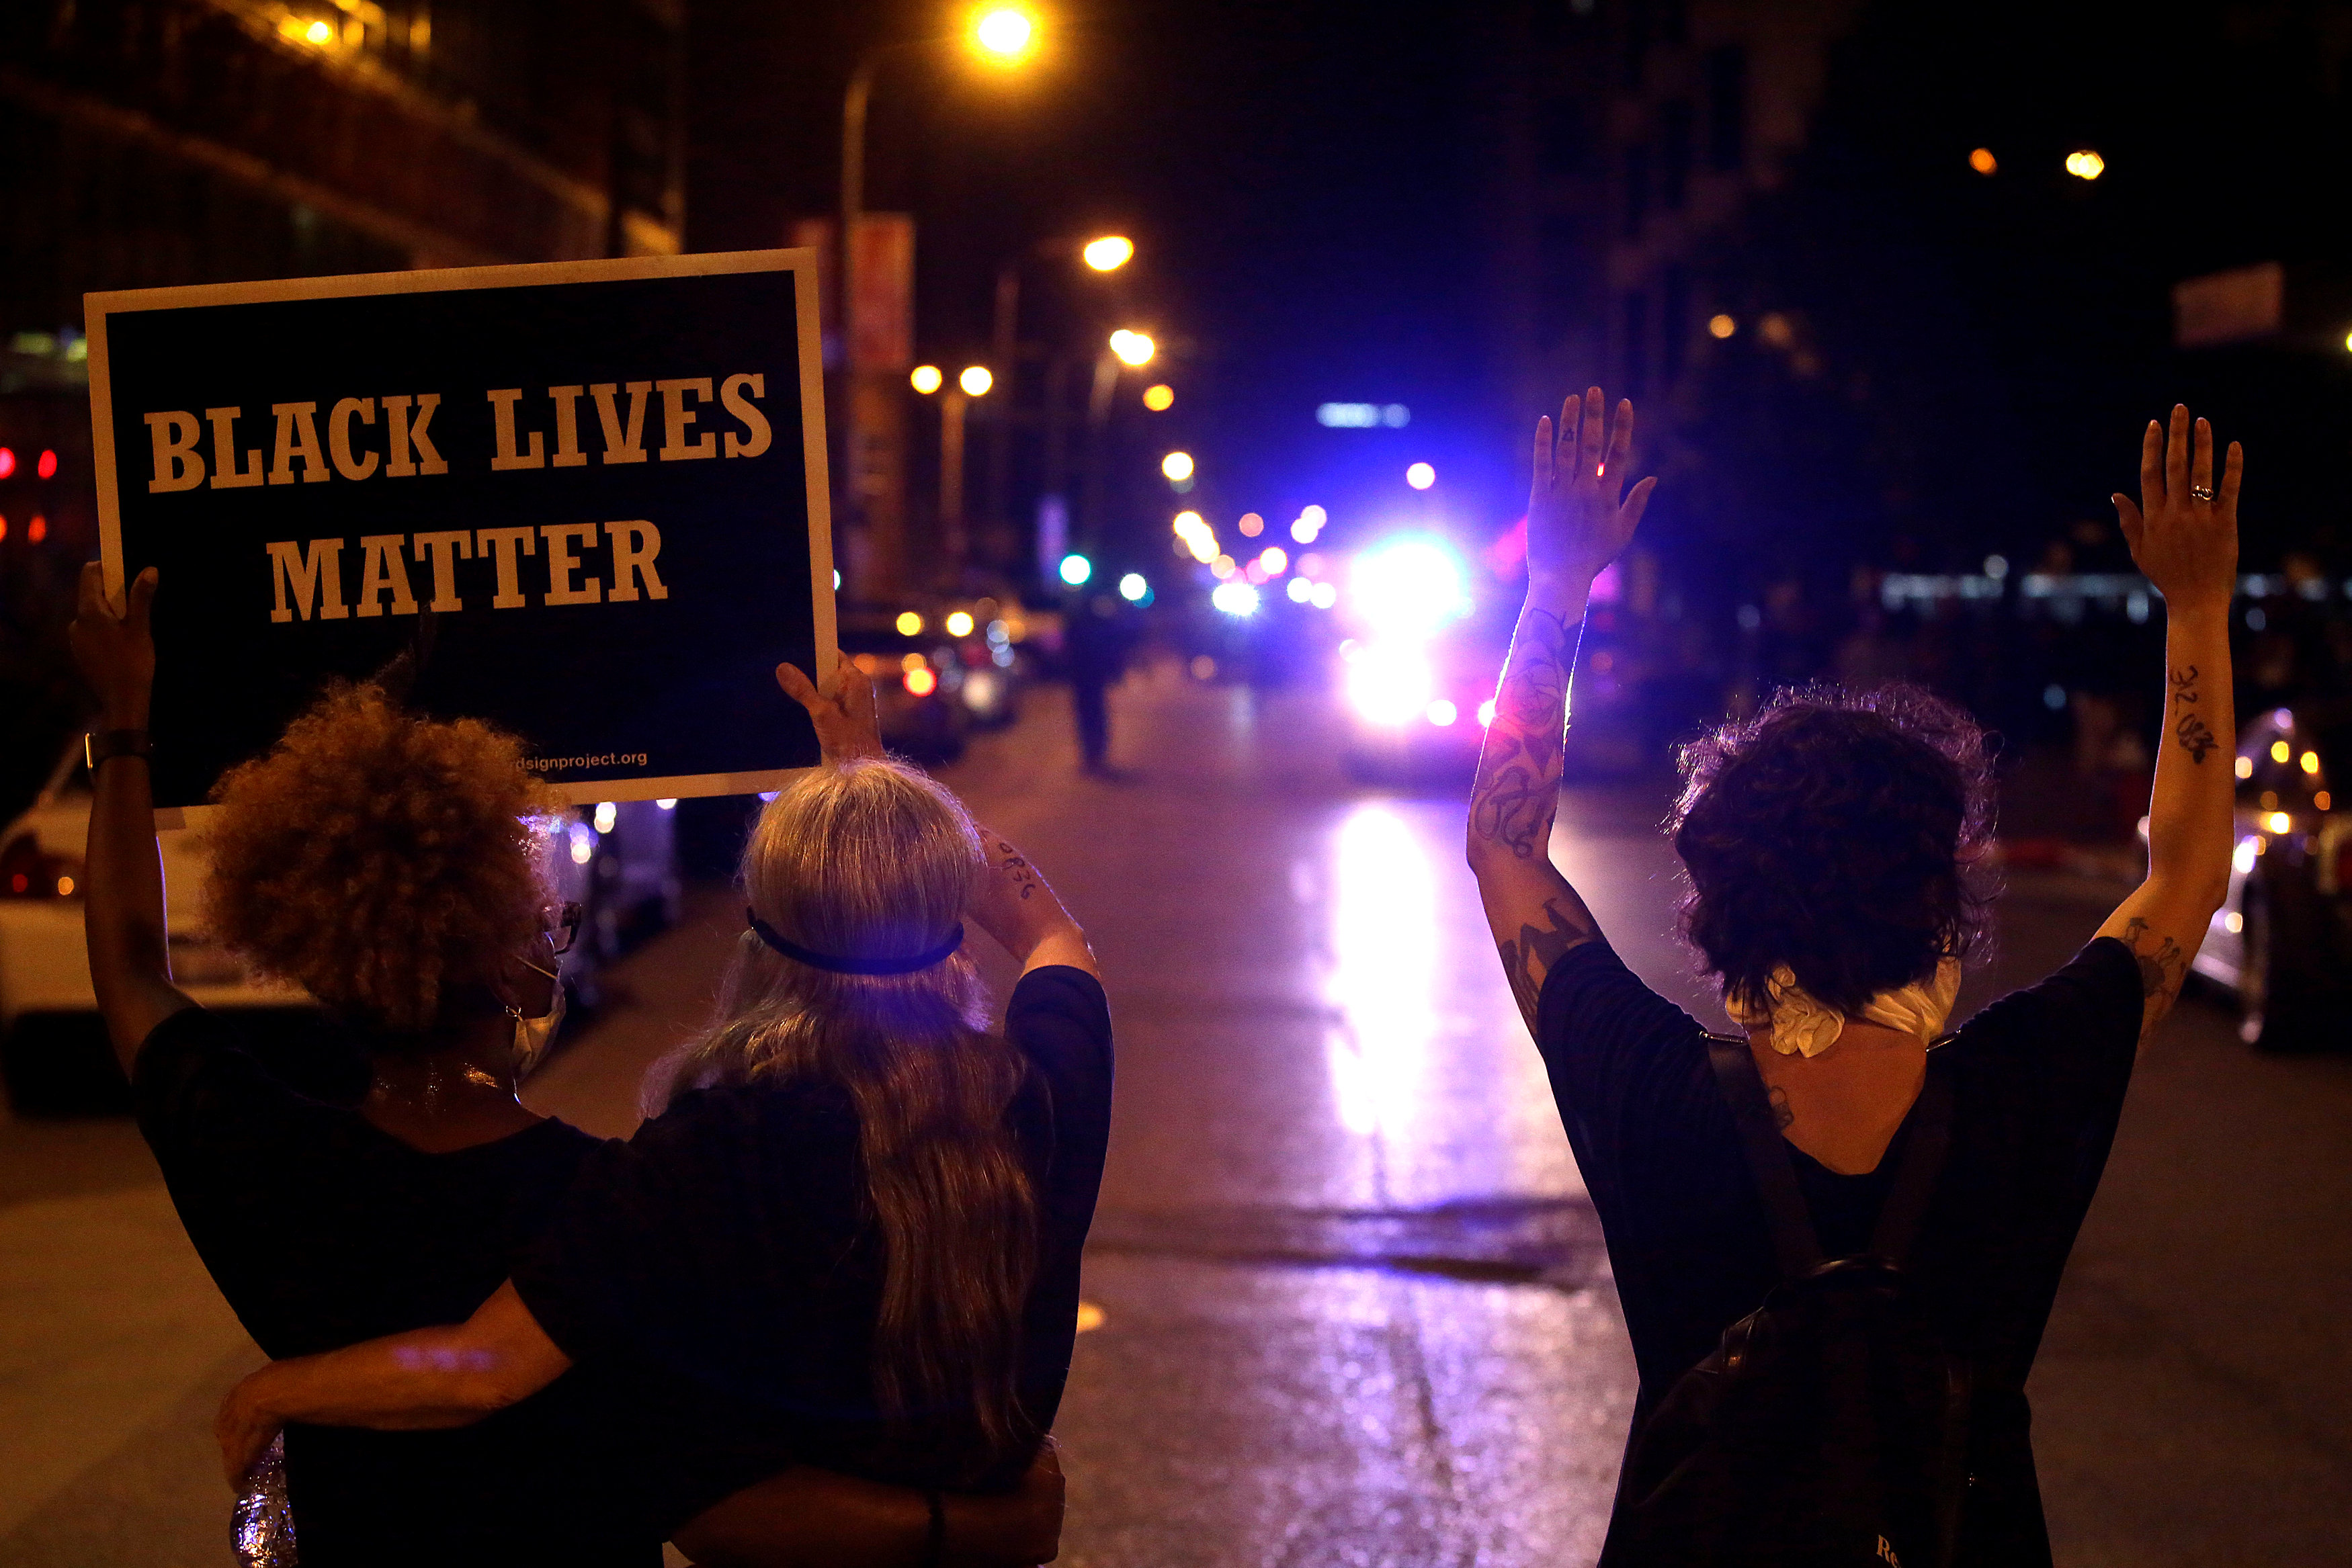 In pictures: Protest against acquittal of former police officer continues in Missouri